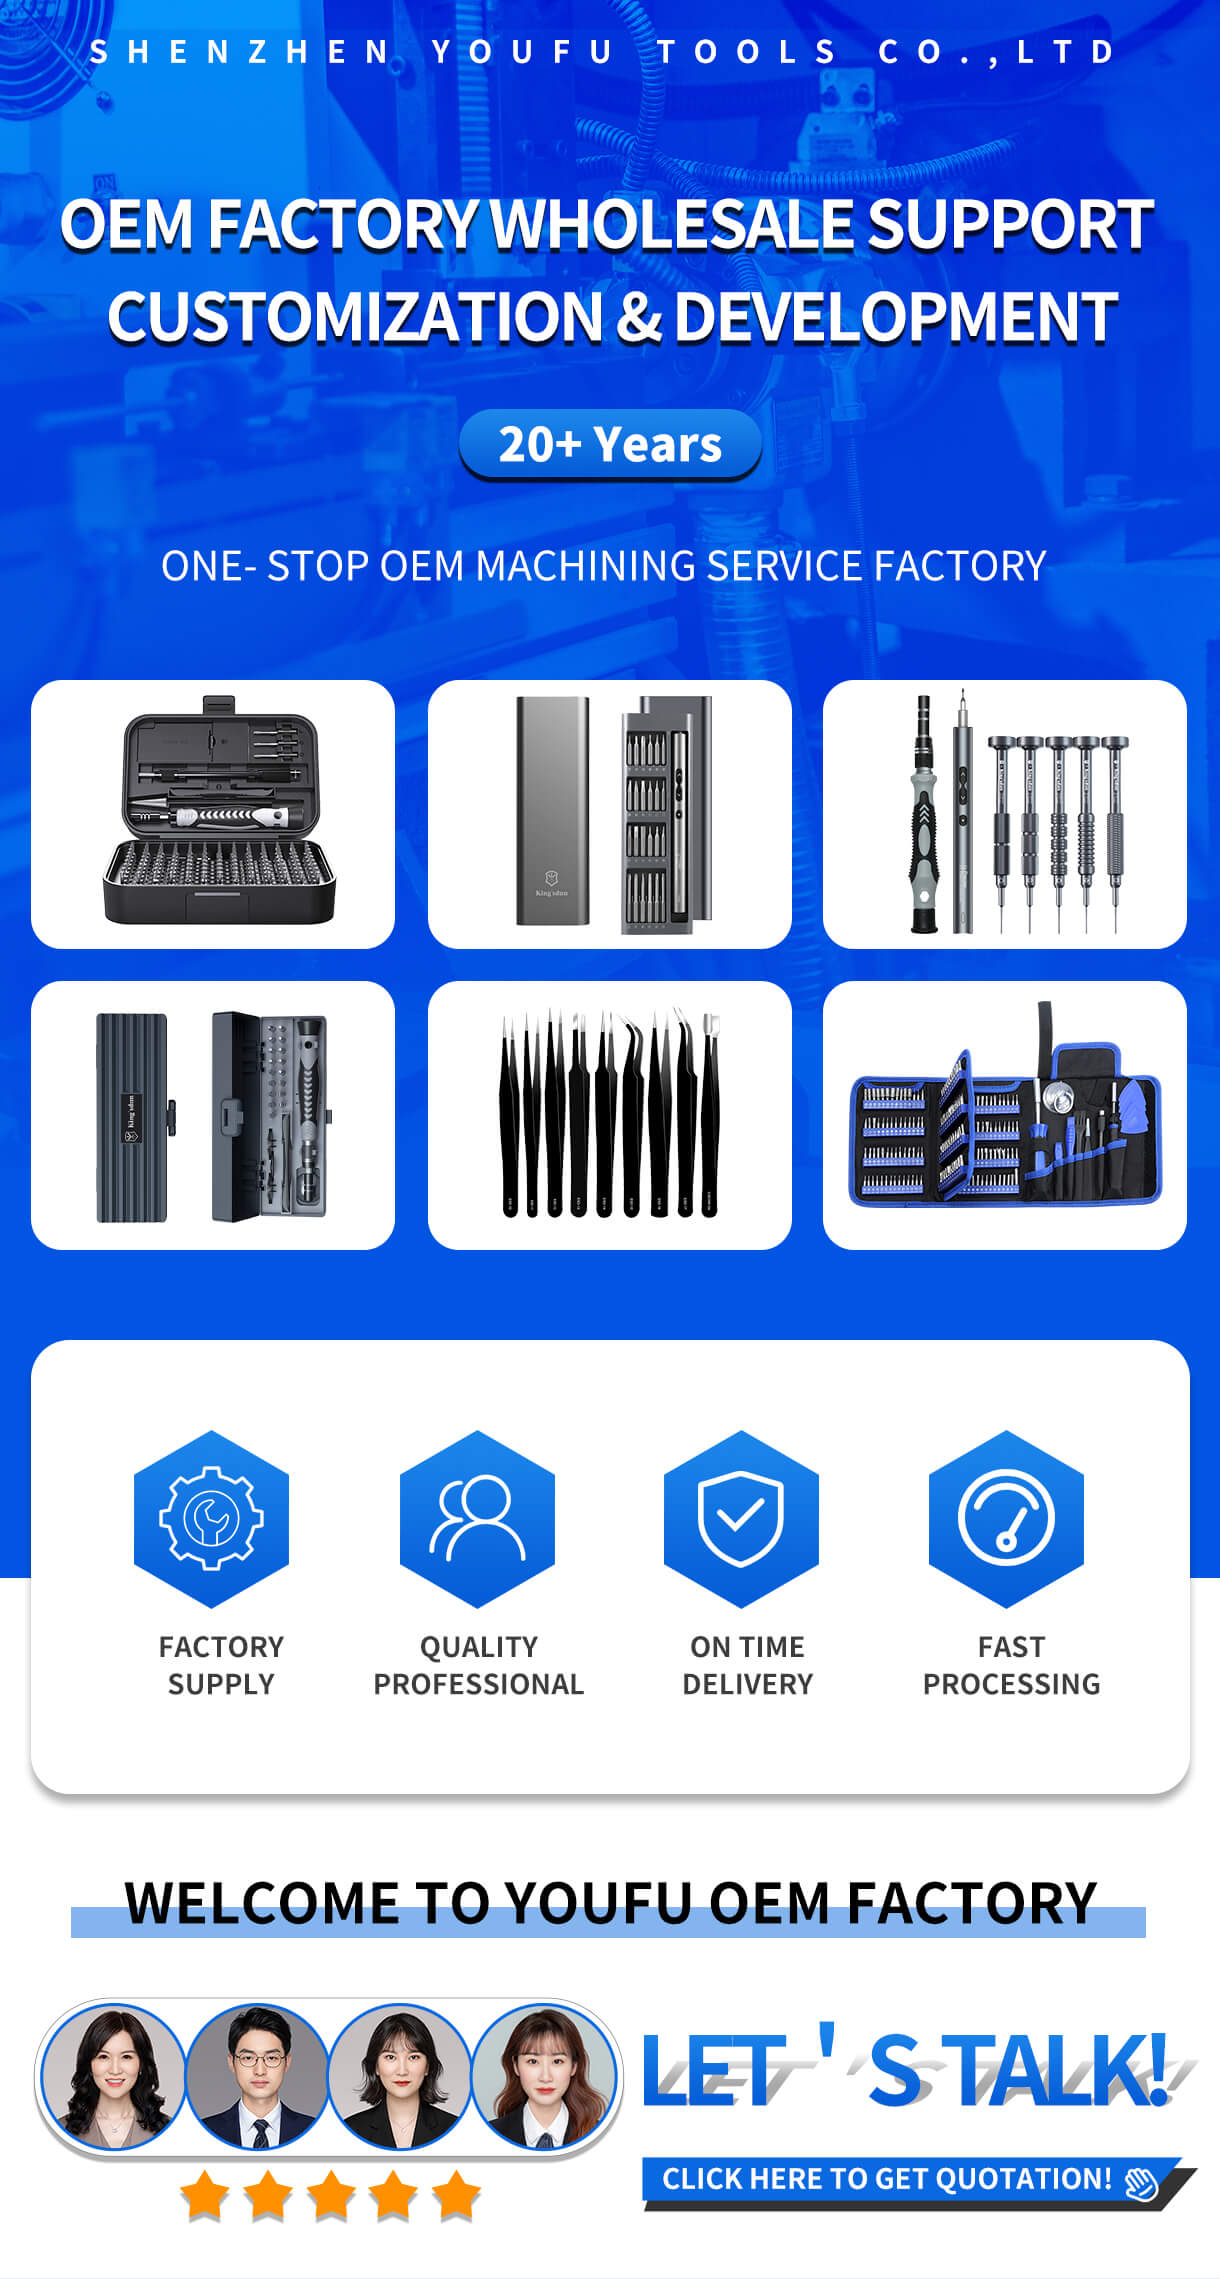 【130 IN 1 Screwdriver Set】With 10 years disassembling electronic and repair guides data, our technicians re-engineered most complete 130 in 1 precision repair tool set, including all you will need for electronics repair, such as Phillips, pentalobe, torx, hex, js, slotted, triangle, square and other sizes.